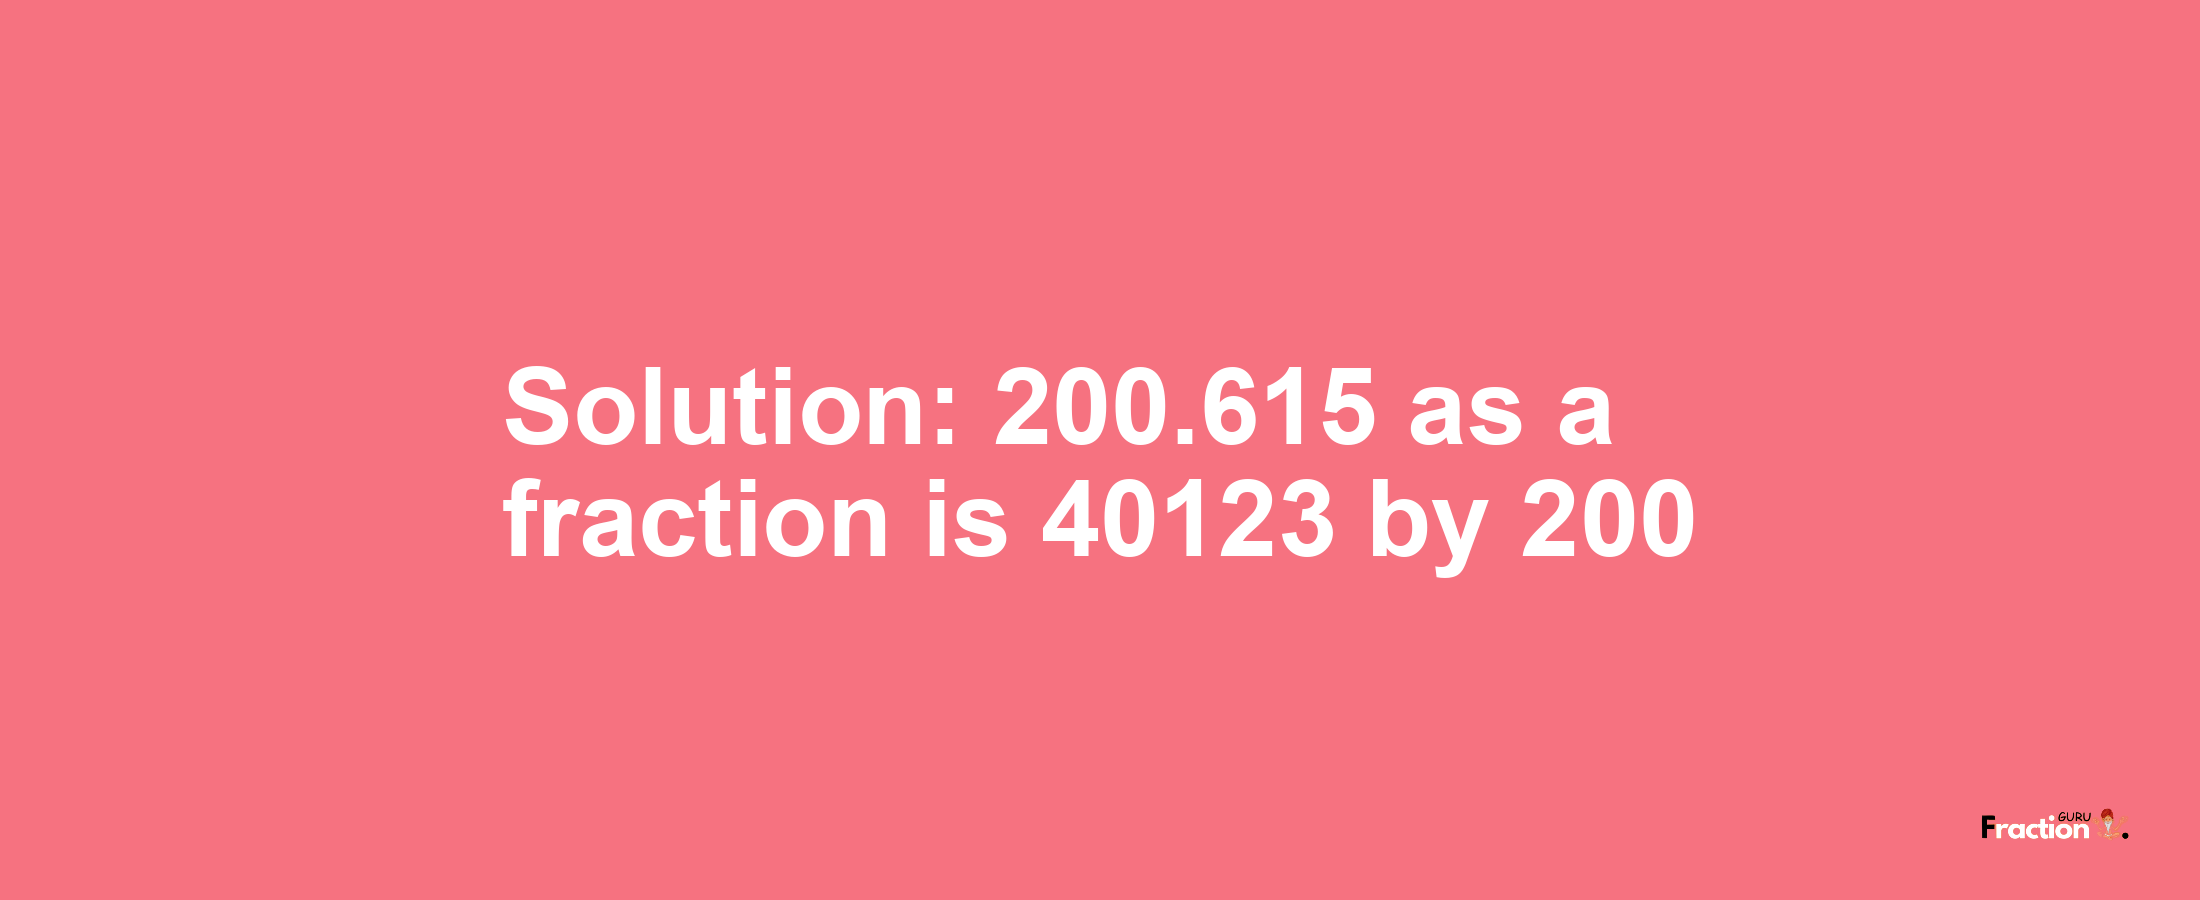 Solution:200.615 as a fraction is 40123/200